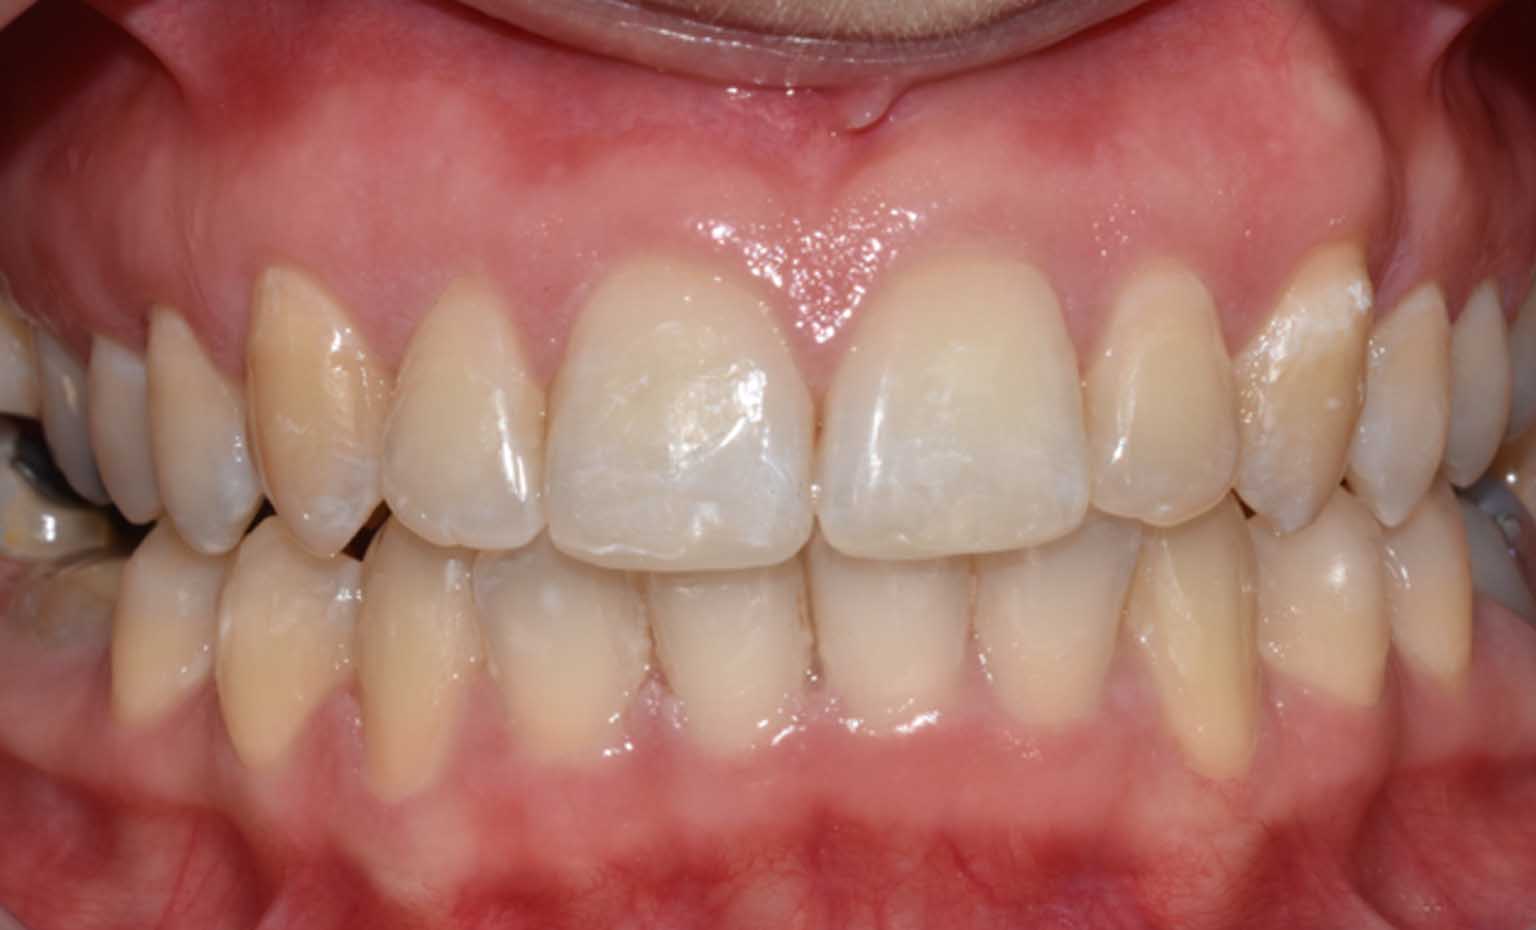 After teeth whitening treatment at Bridgford Dental Practice